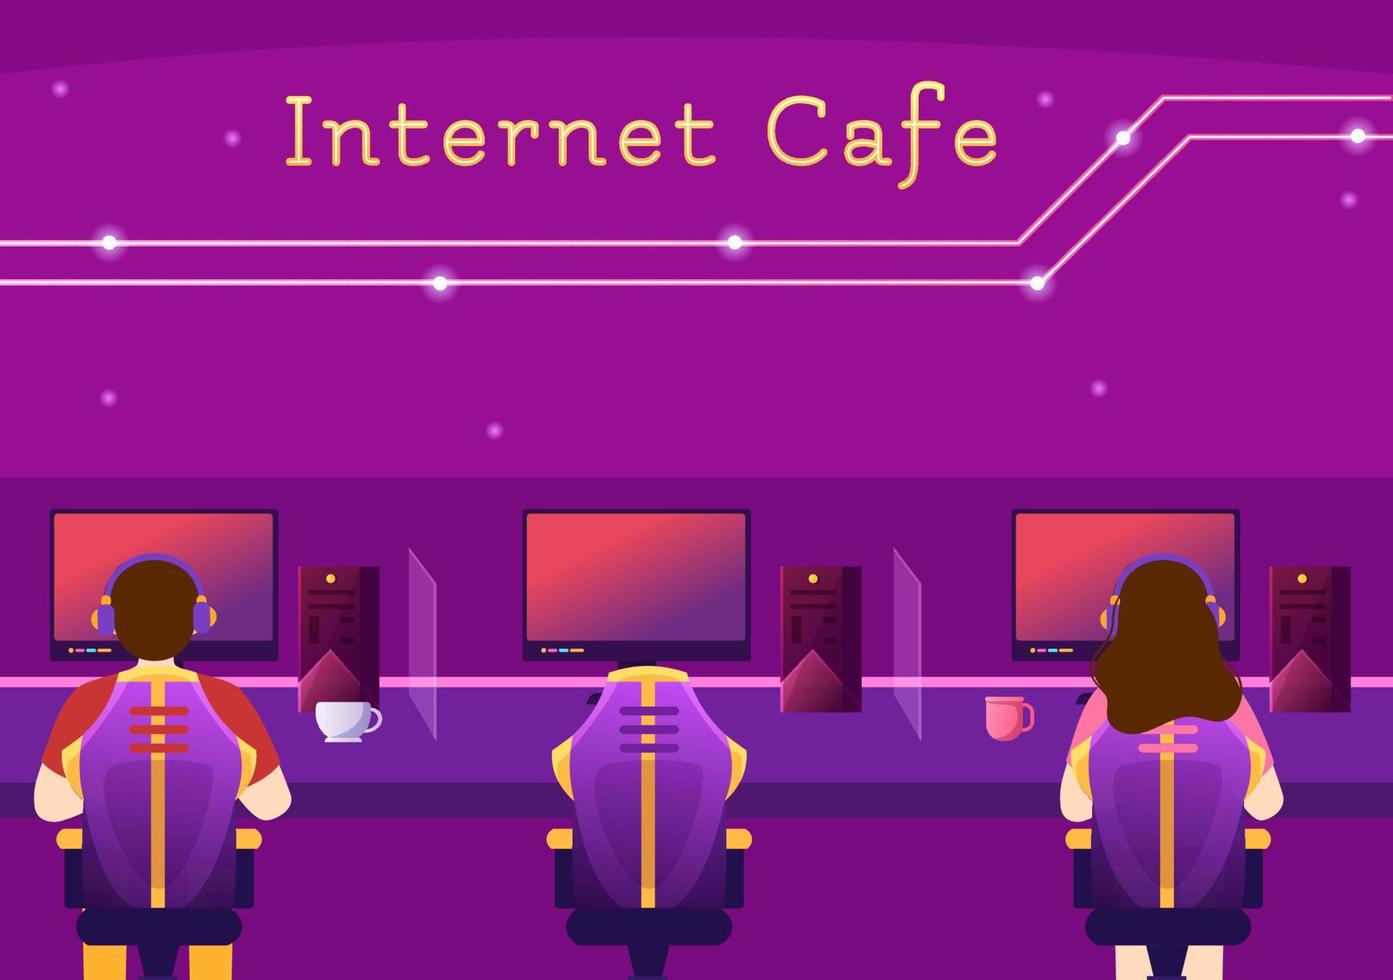 Internet Cafe of Young People Playing Games, Workplace use a Laptop, Talking and Drinking in Flat Cartoon Hand Drawn Templates Illustration vector